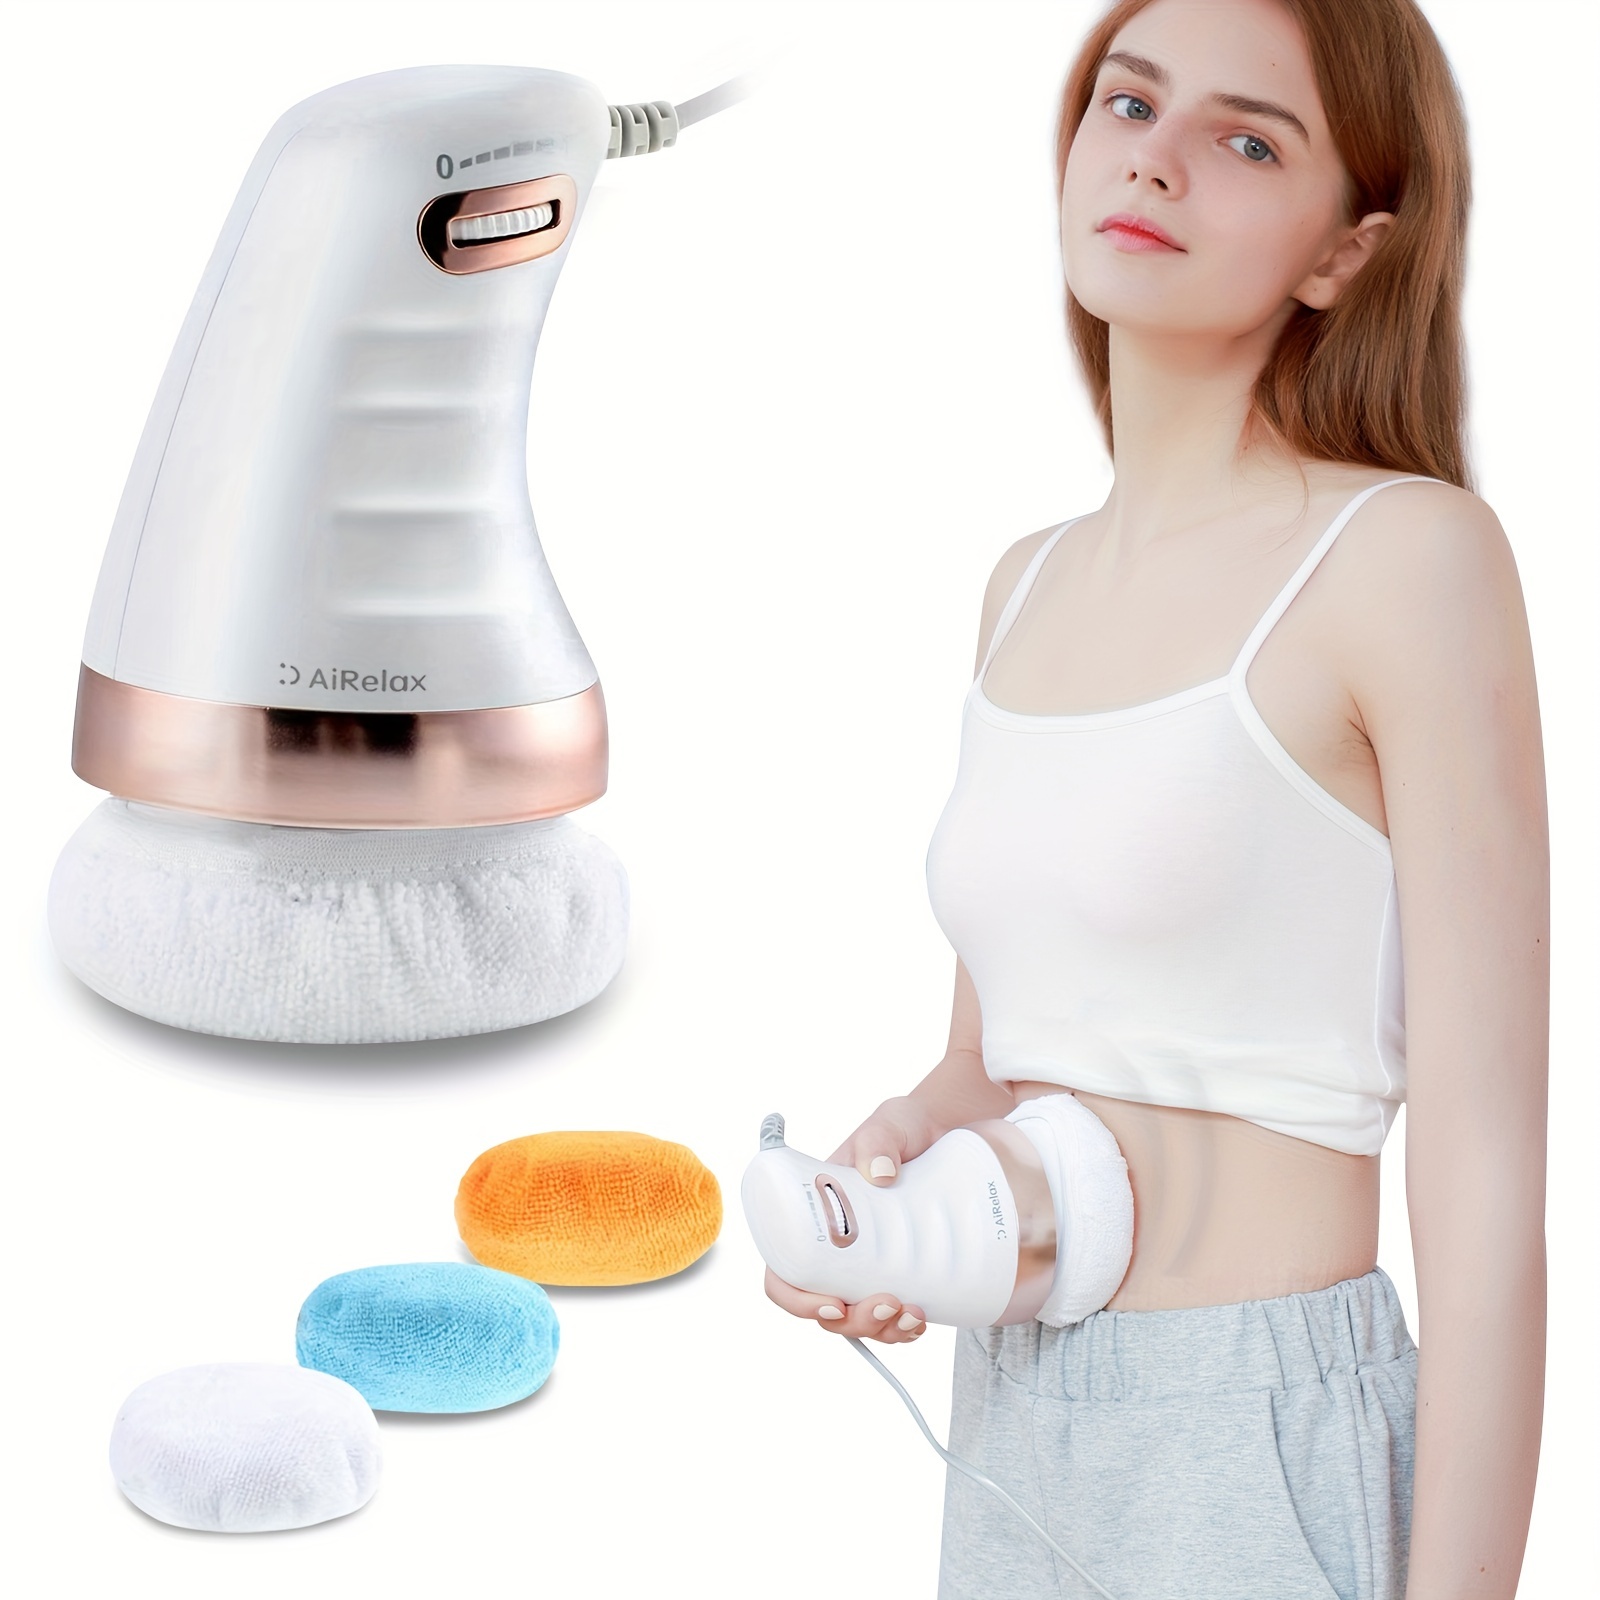 Handheld-Cellulite Massager, Body Sculpting-Machine Full Body Massager Hand  Held Back-Massager Electric Foot Massager, Body Shaper for Women,  Celulitis-Remover Machine with 4 Massage Wand Attachment